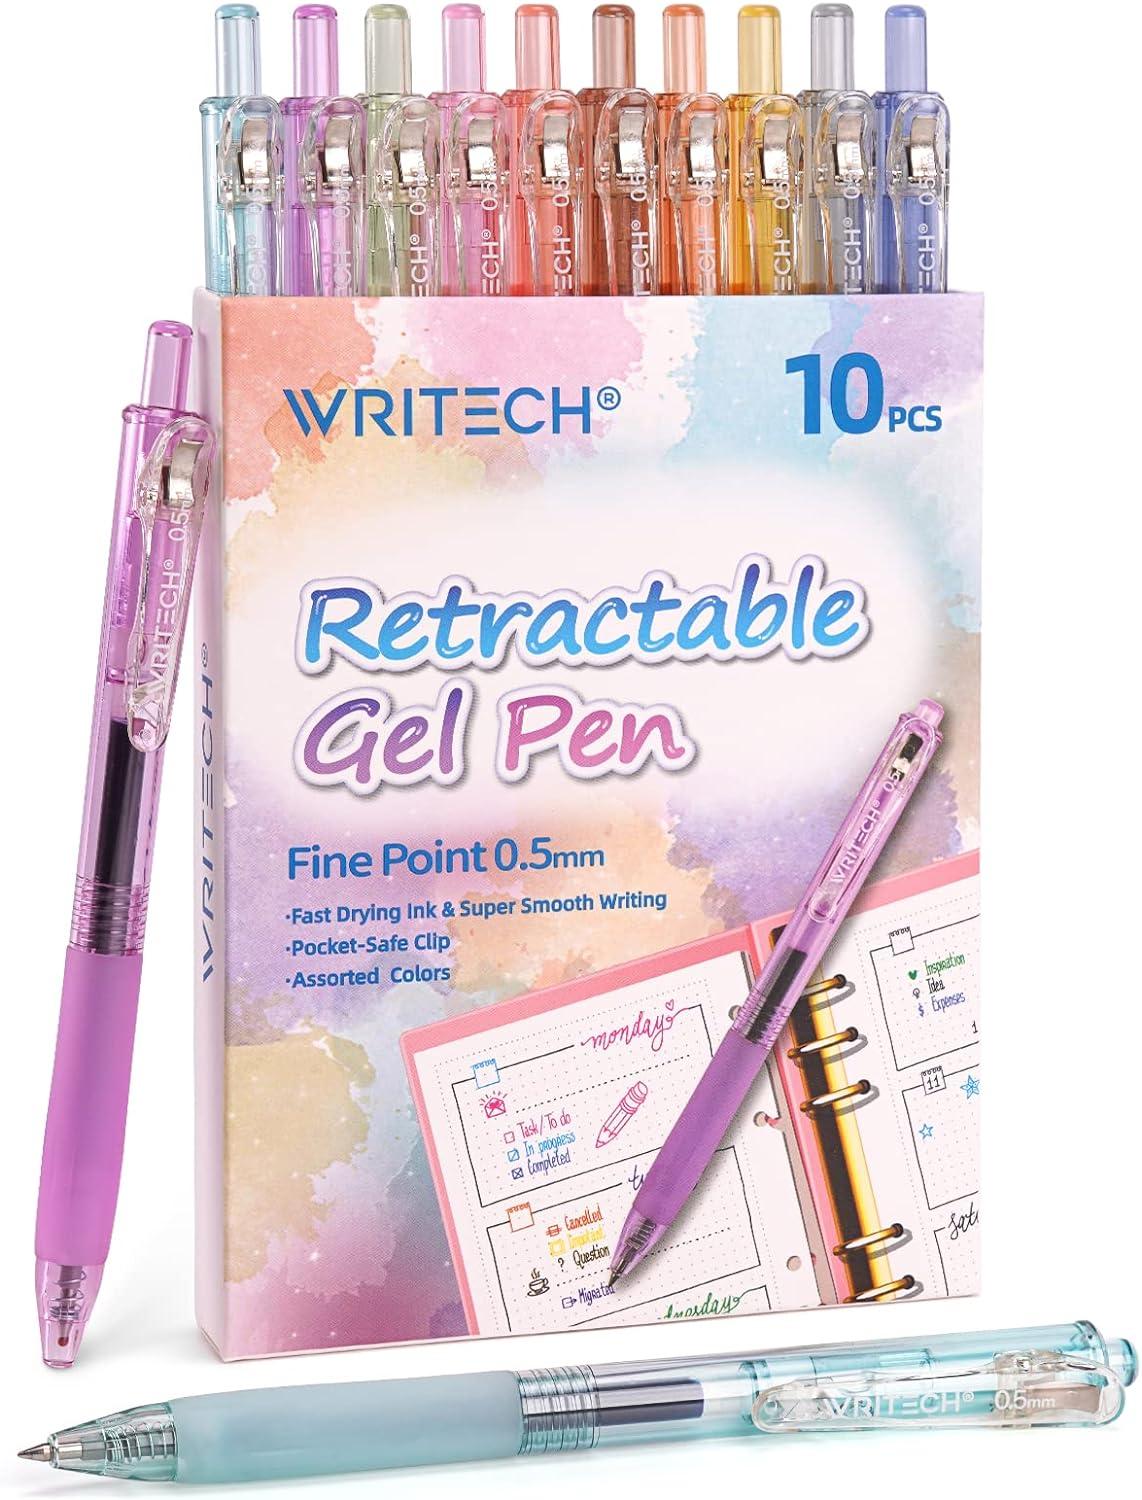 writech retractable gel pens quick dry ink pens fine point 0 5mm multicolor for journaling drawing doodling